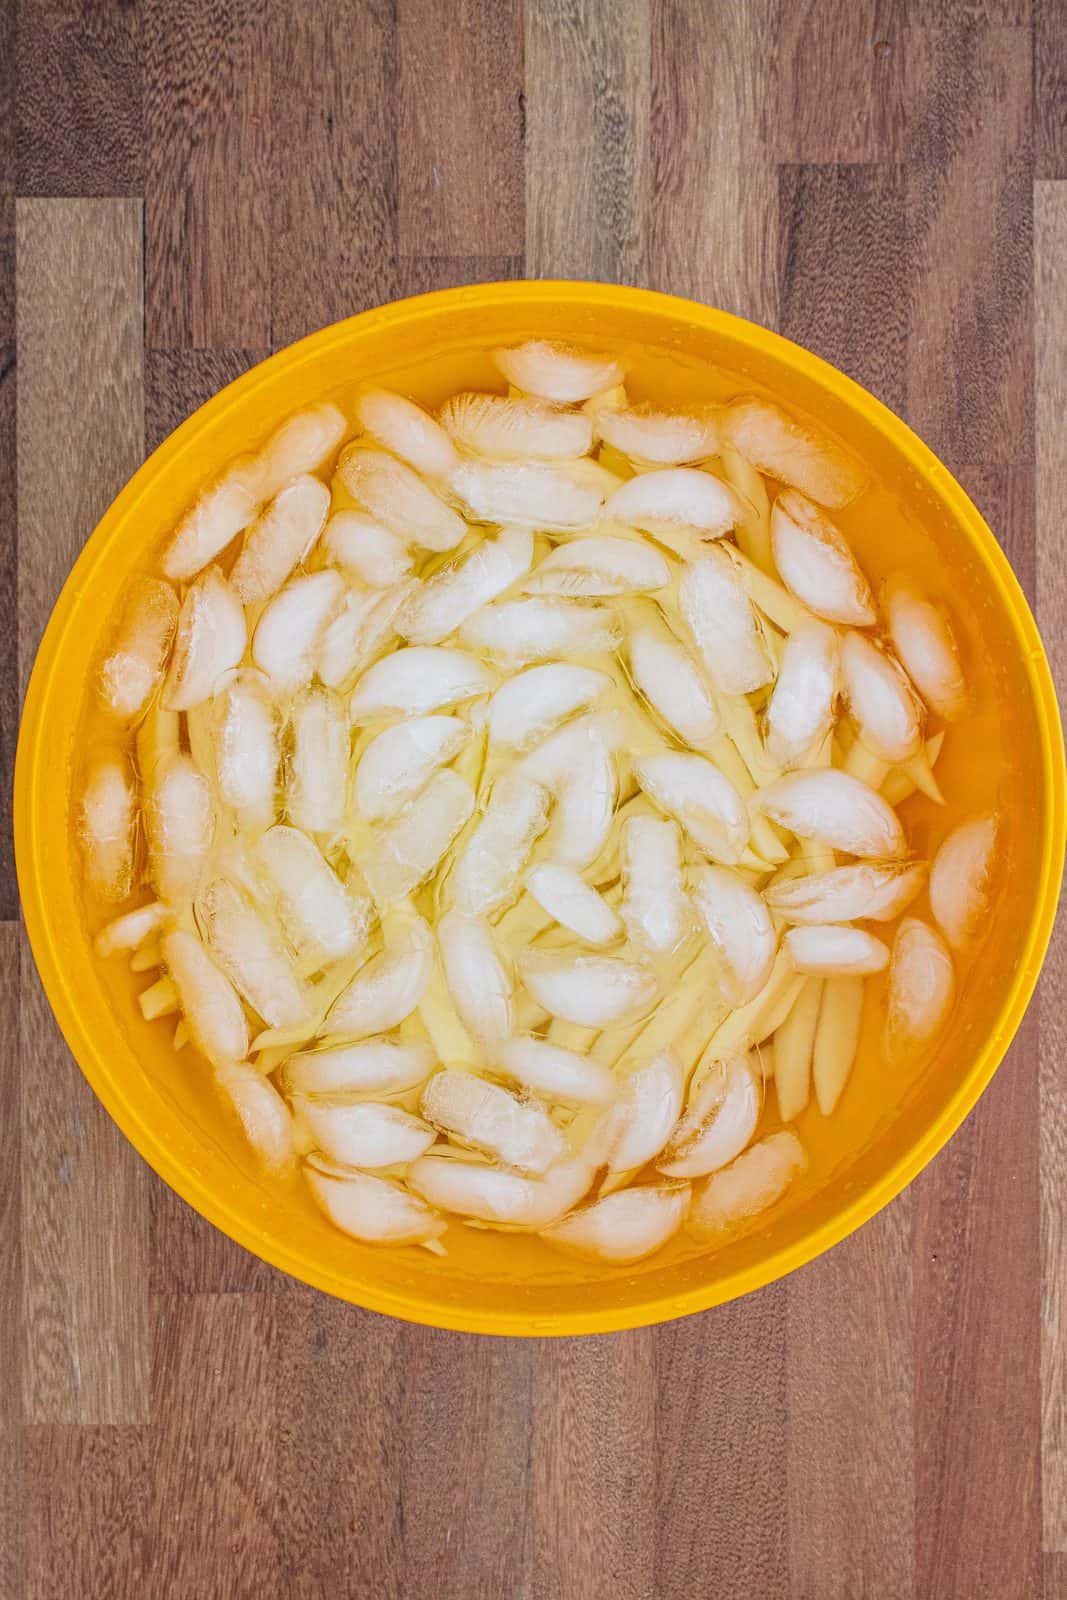 sliced uncooked French fries soaking in an ice water bath